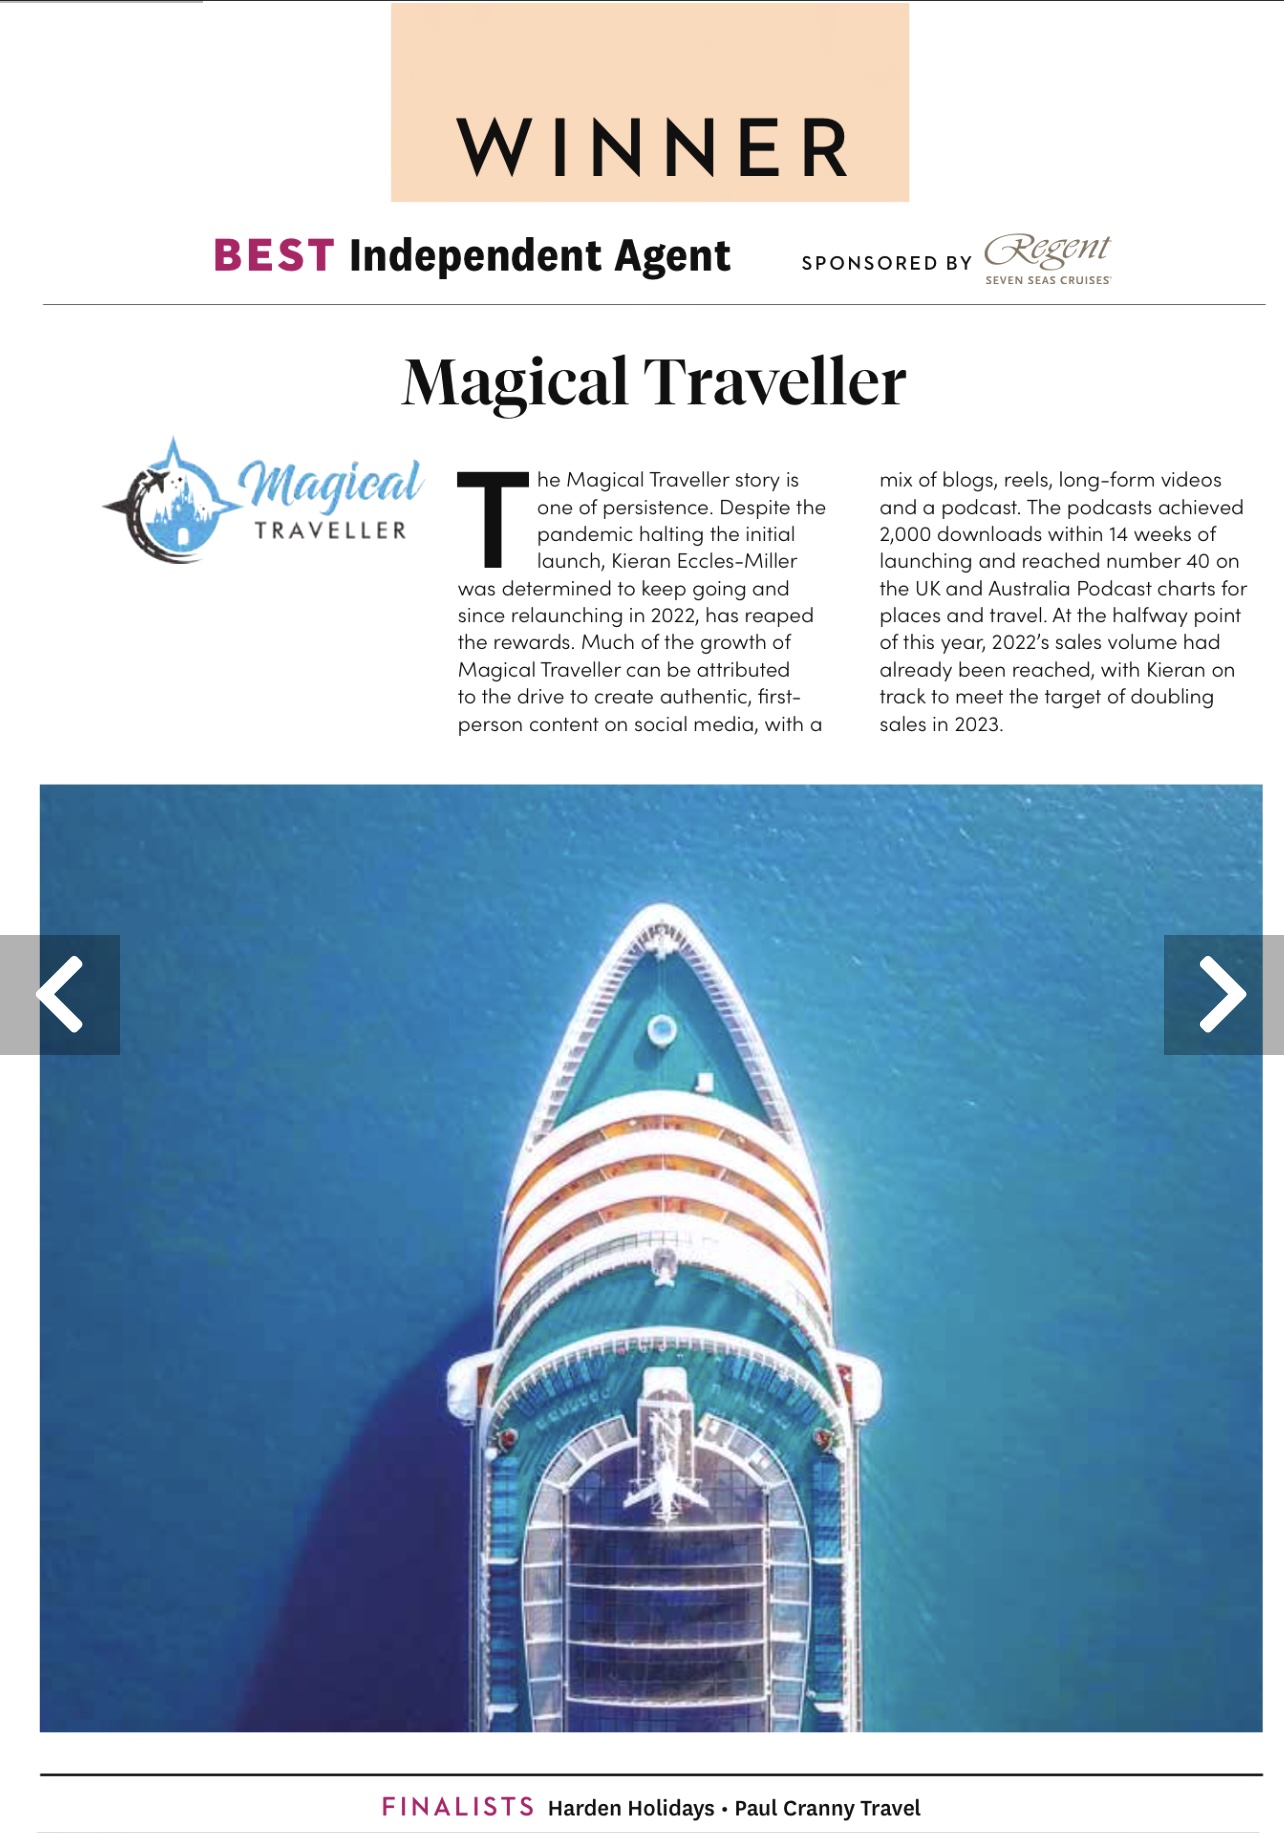 Magical Traveller Wins Best independent Agency
